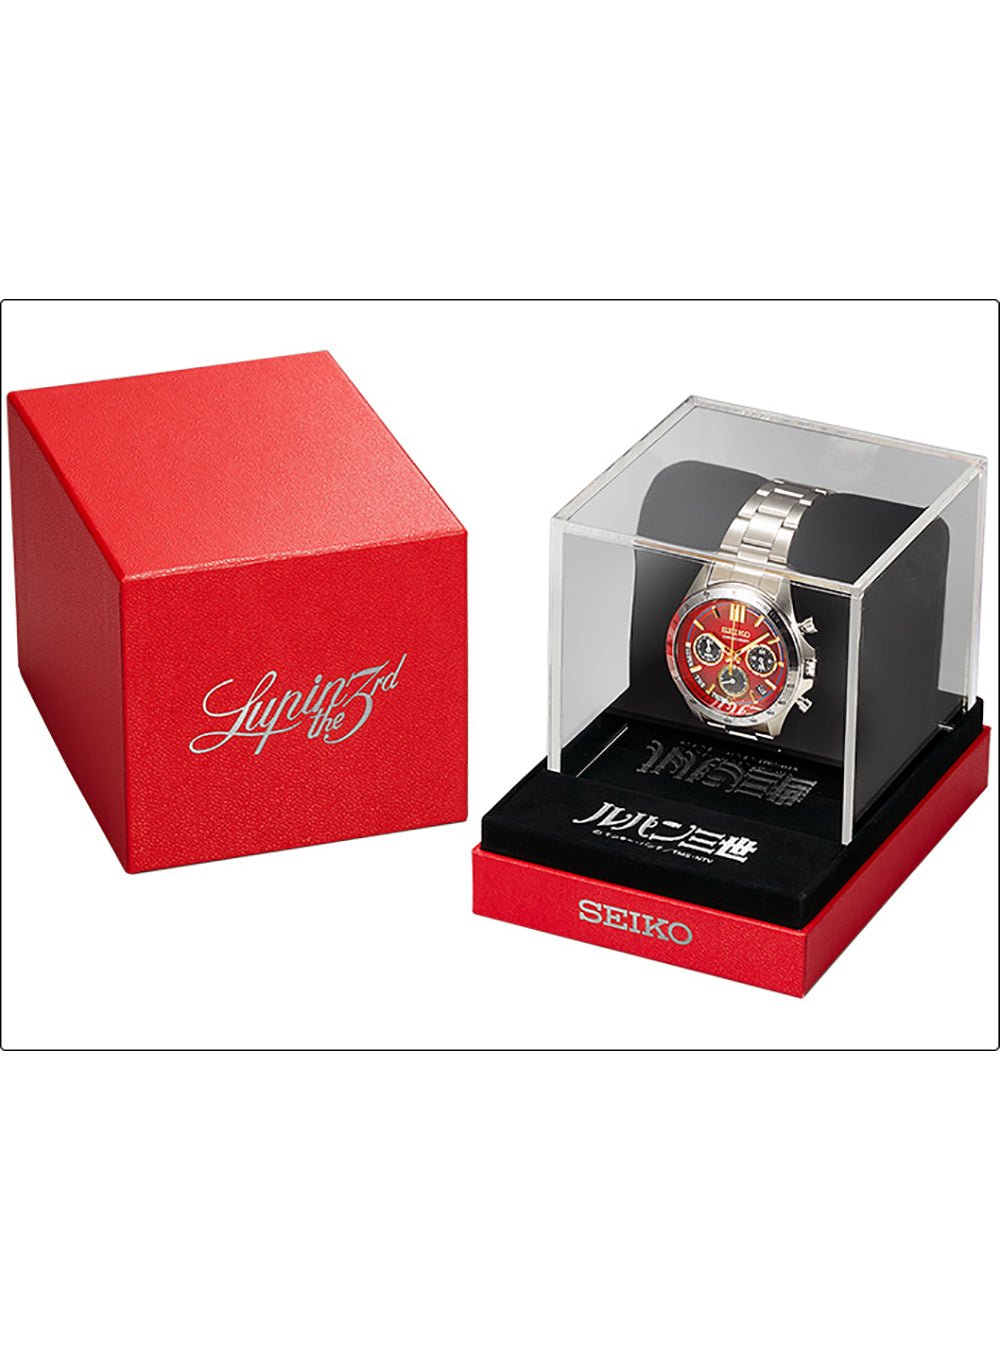 SEIKO x LUPIN THE THIRD COLLABORATION WATCH LIMITED EDITION MADE IN JAPANWRISTWATCHjapan-select